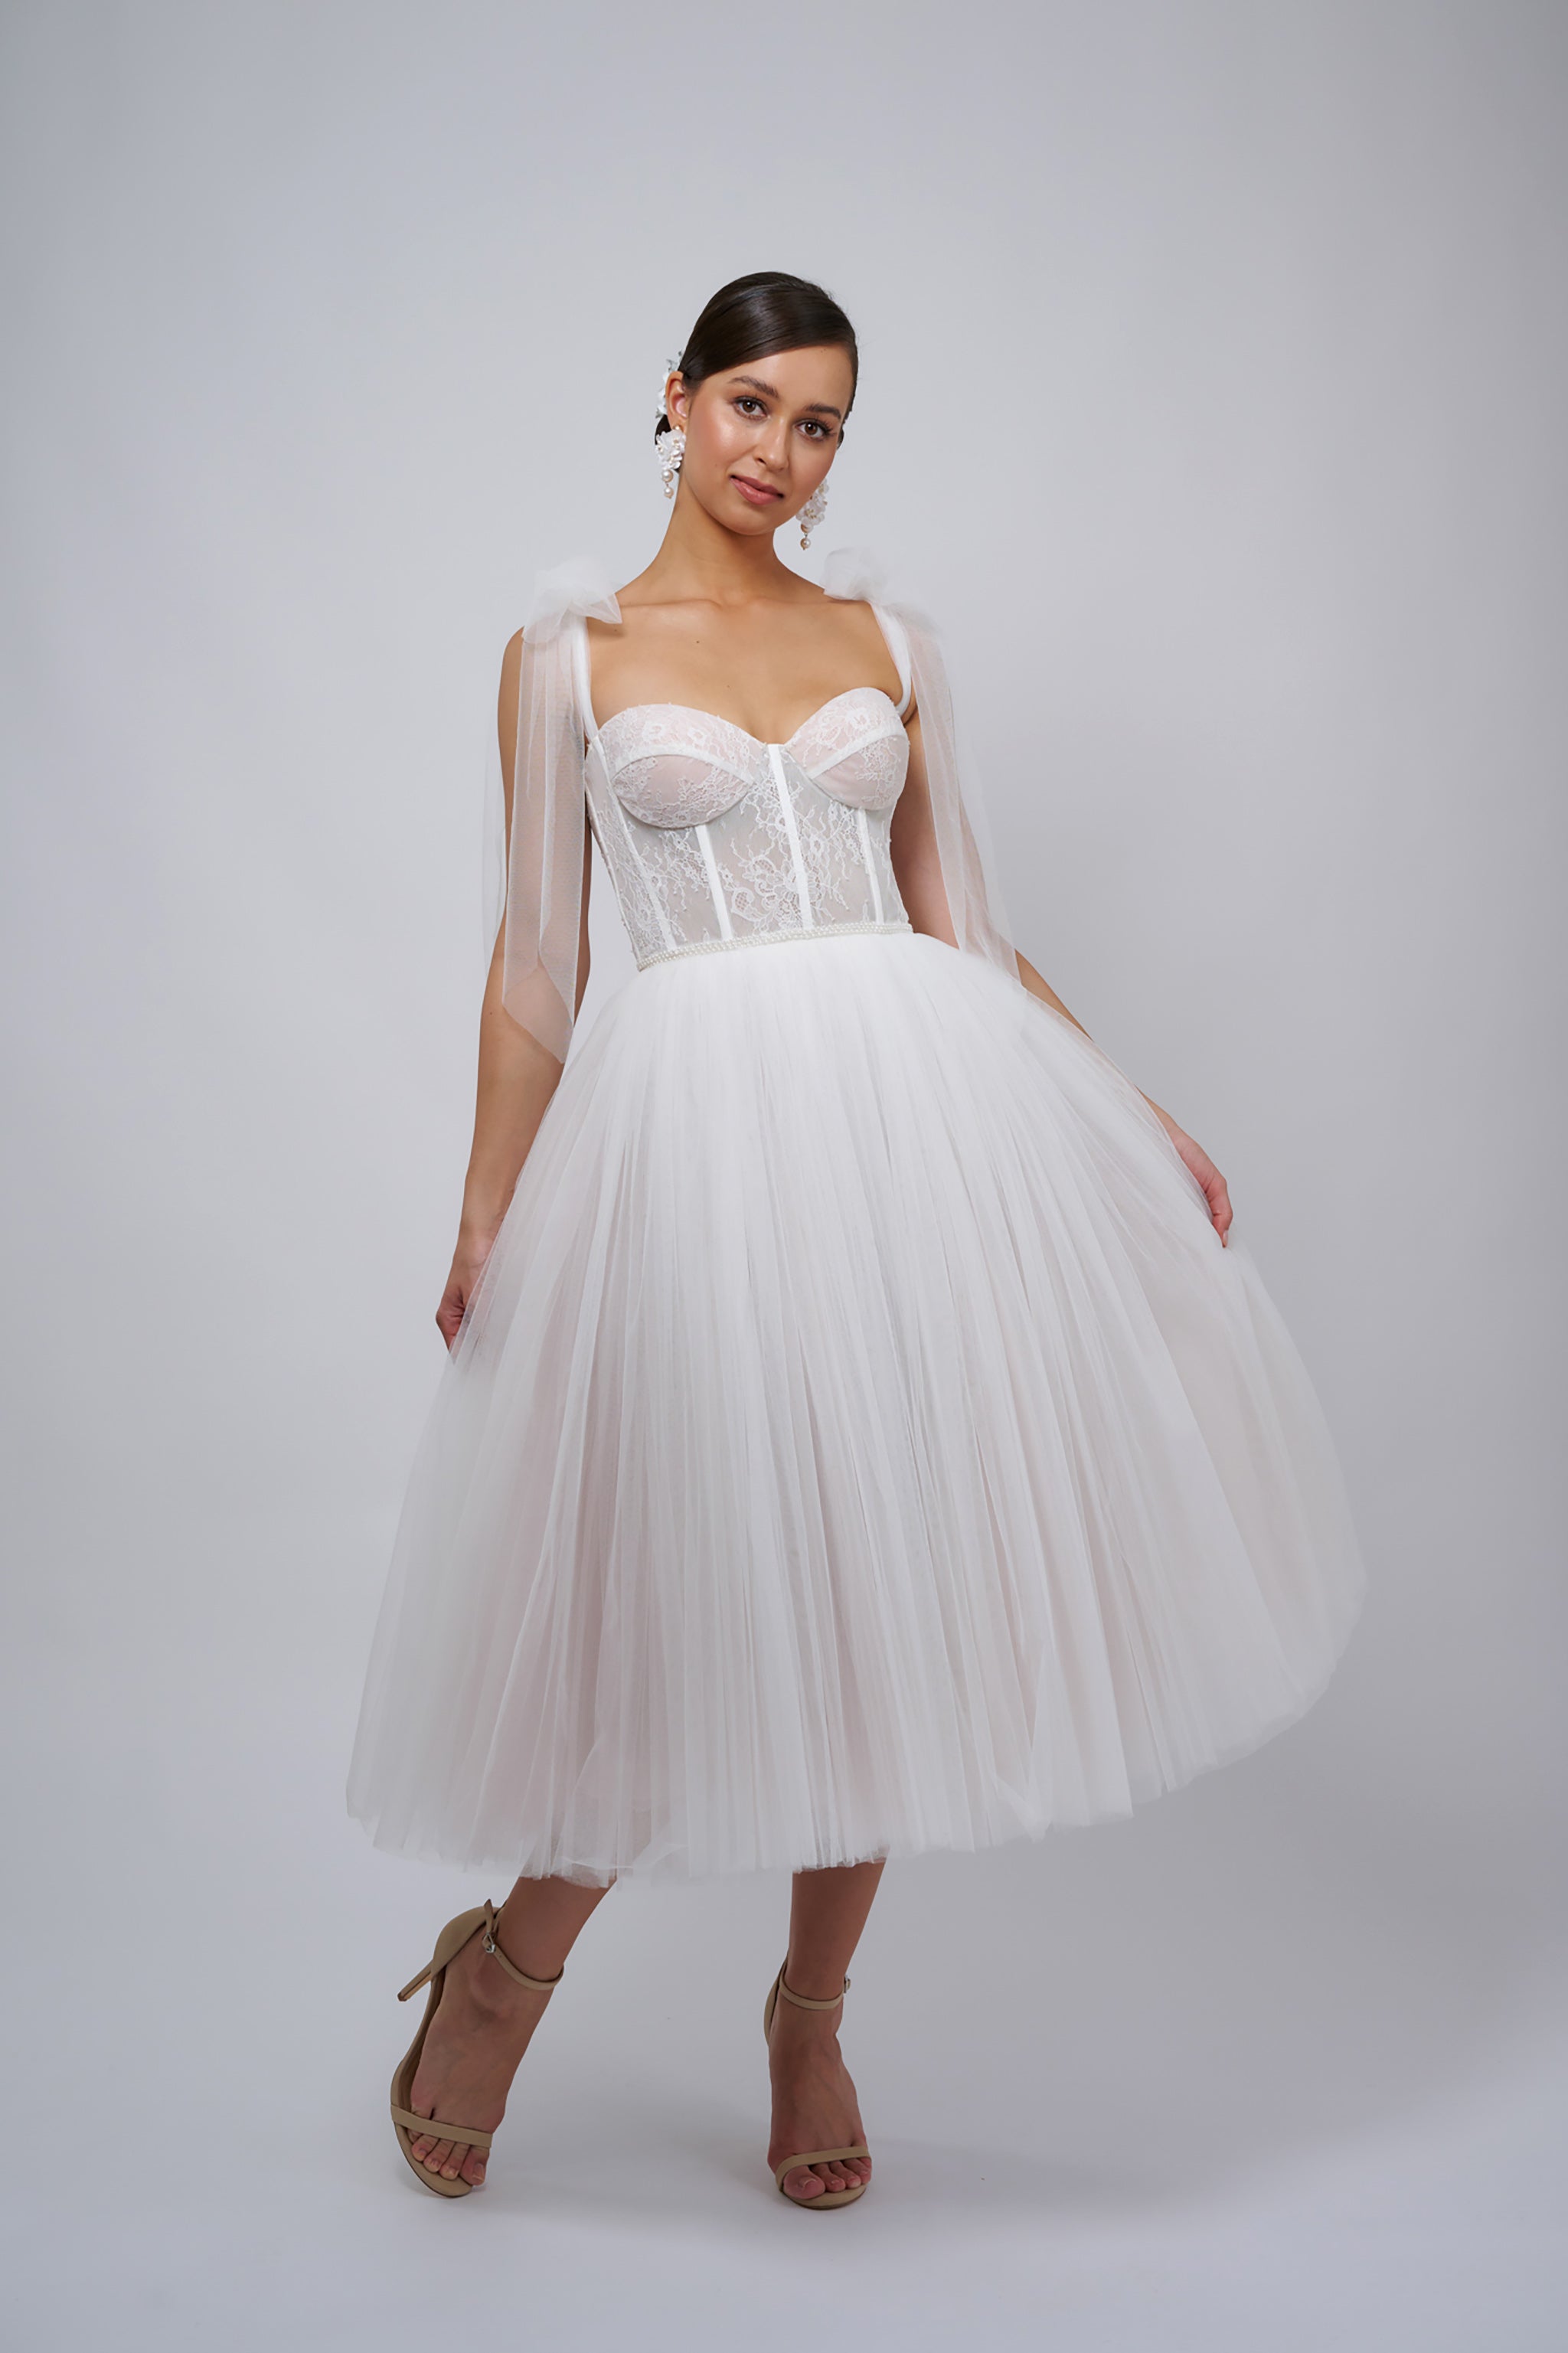 brunette woman wearing corsette wedding dress with bow tie shoulder straps and flowing tulle skirt